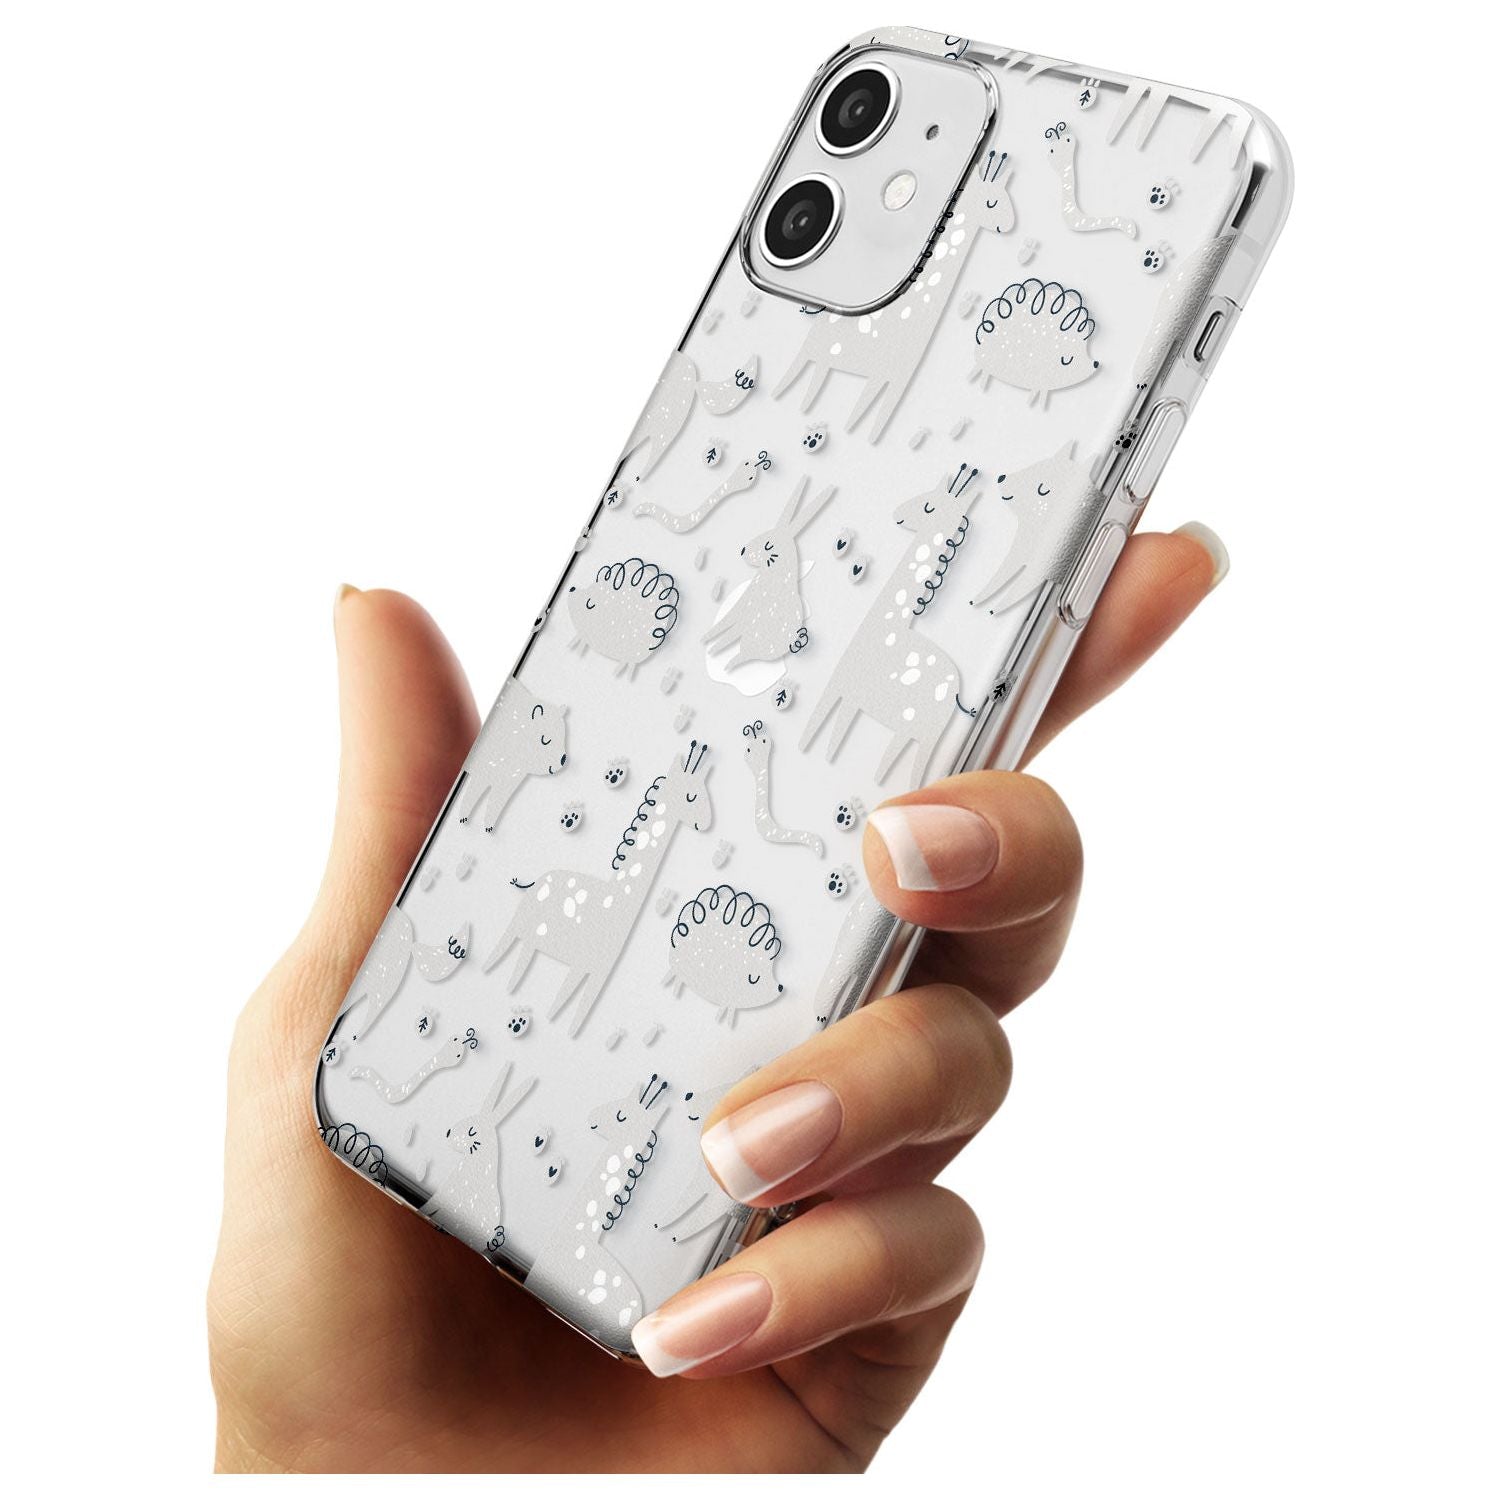 Adorable Mixed Animals Pattern (Clear) Slim TPU Phone Case for iPhone 11